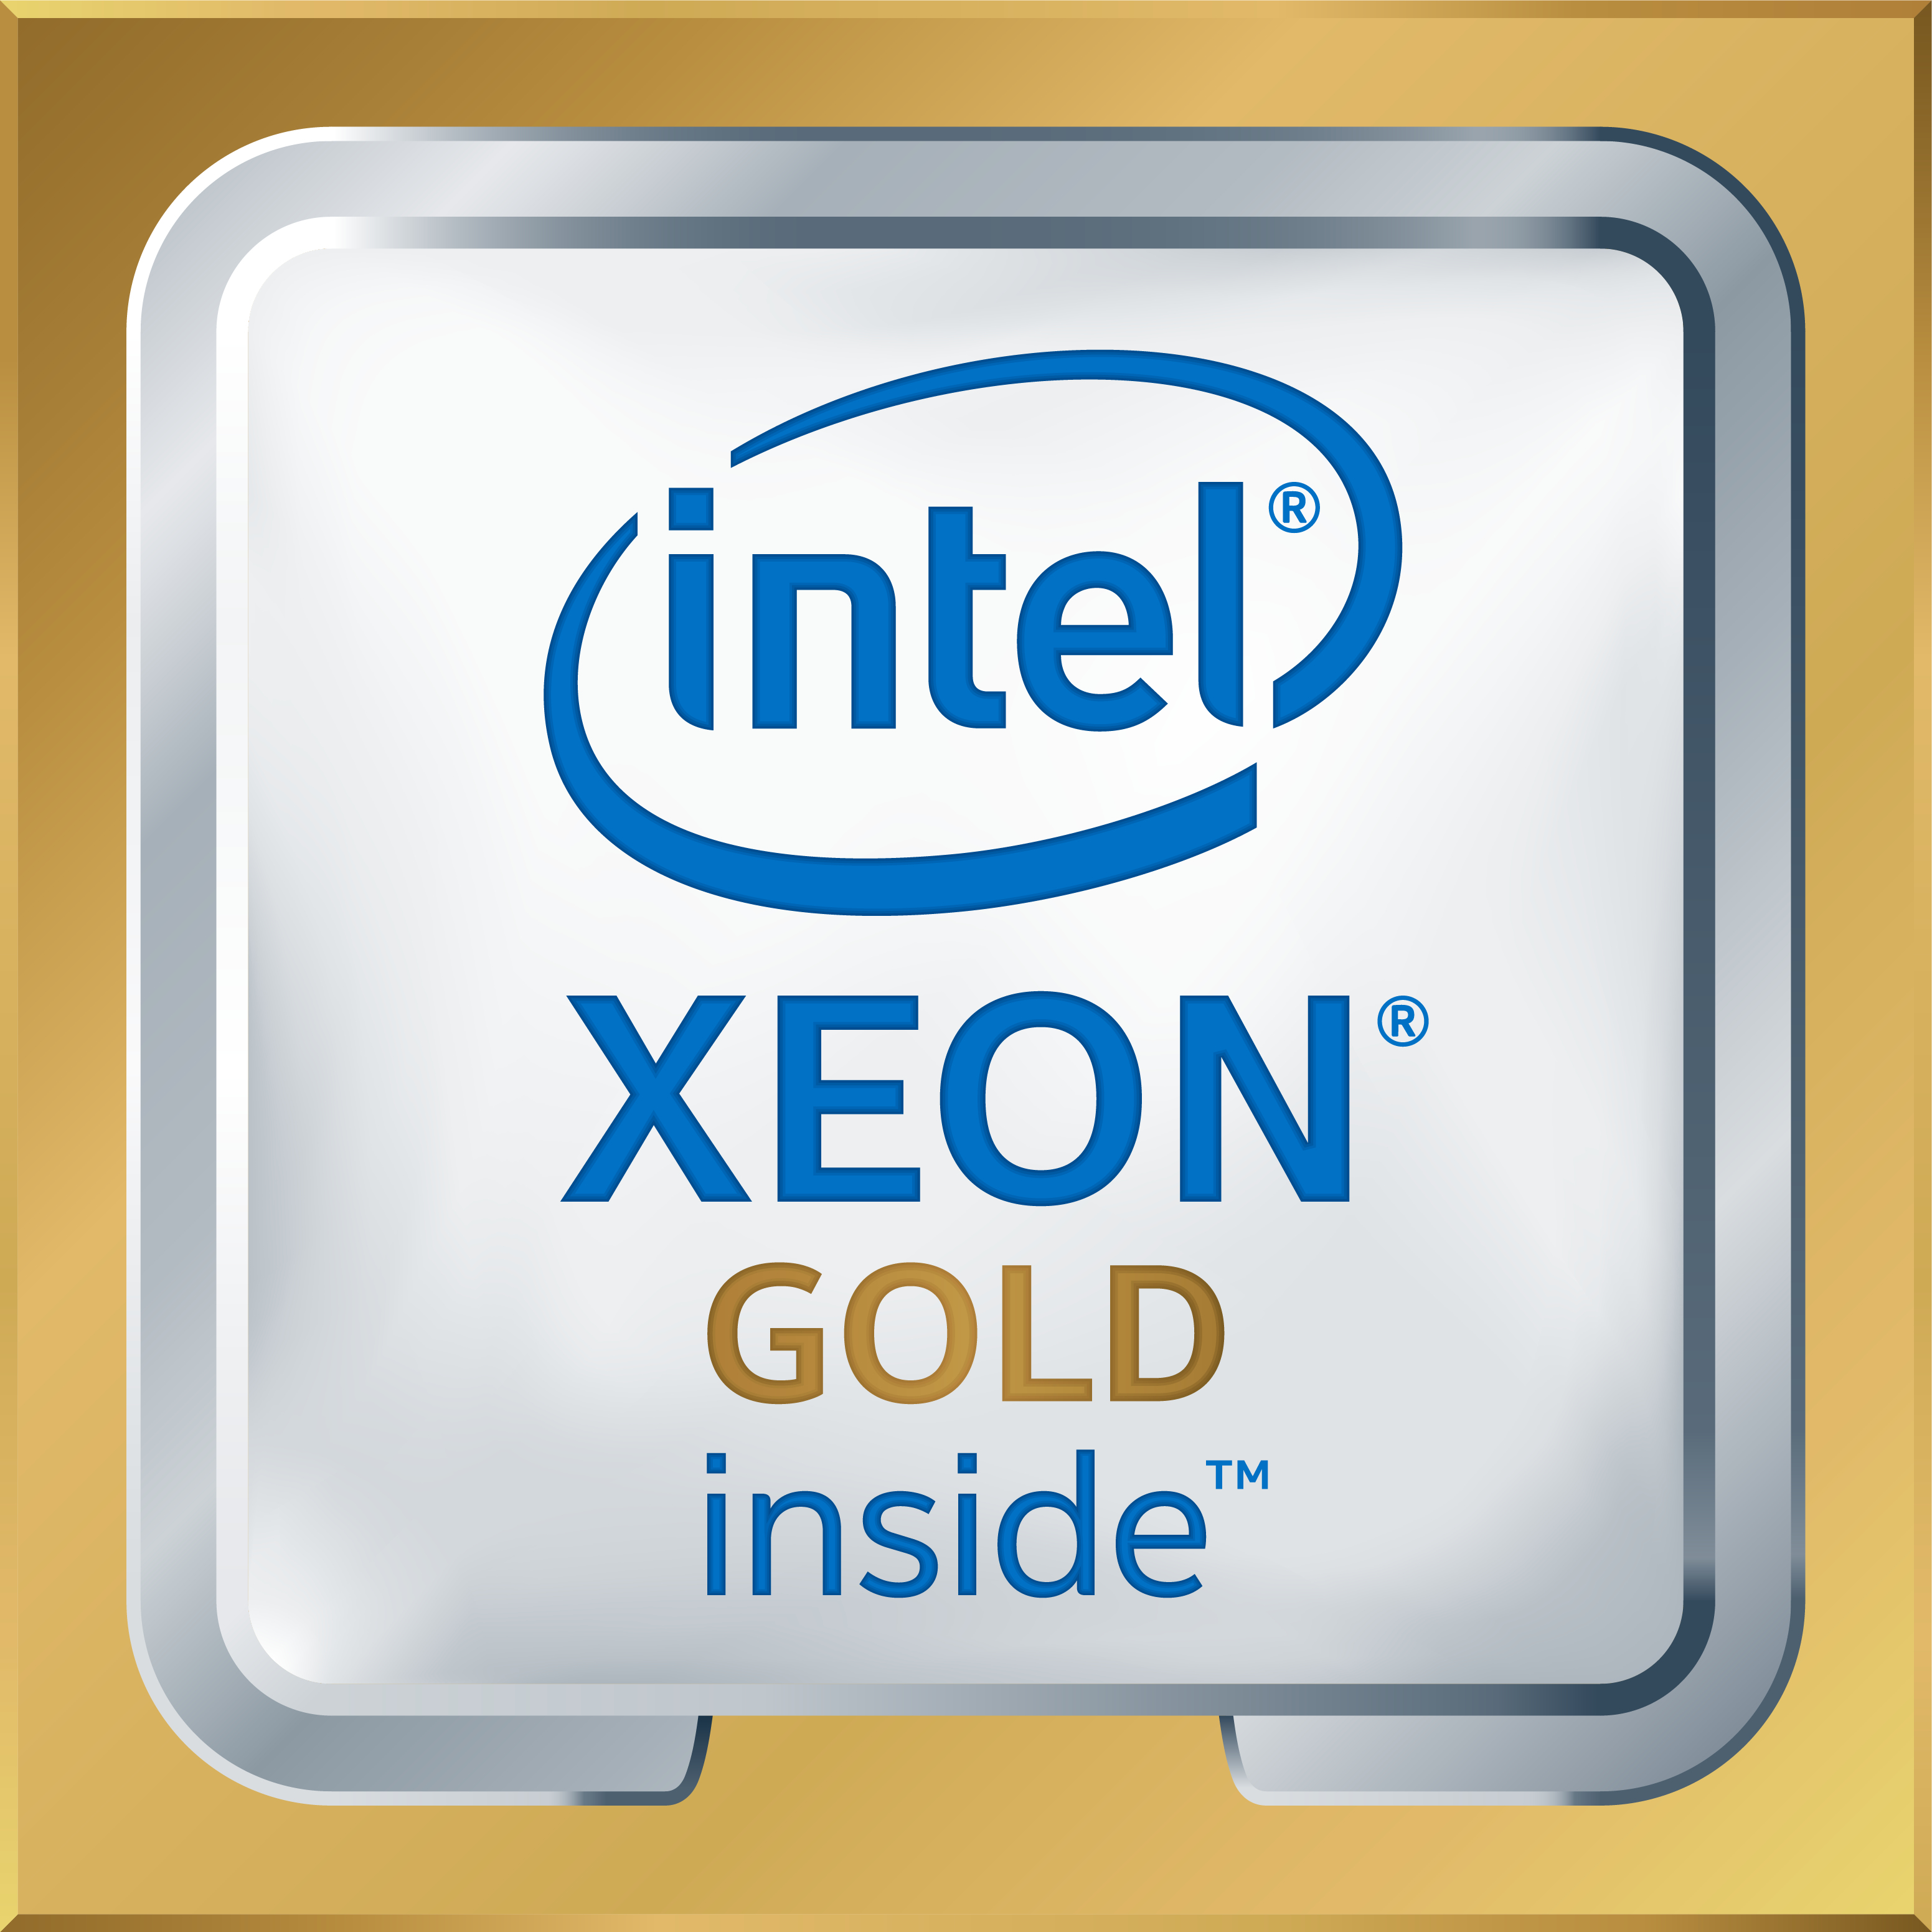 2 x Intel Xeon Gold 5122 - 3.6 GHz - 4 cores - 16.5 MB cache - for ThinkSystem SN850